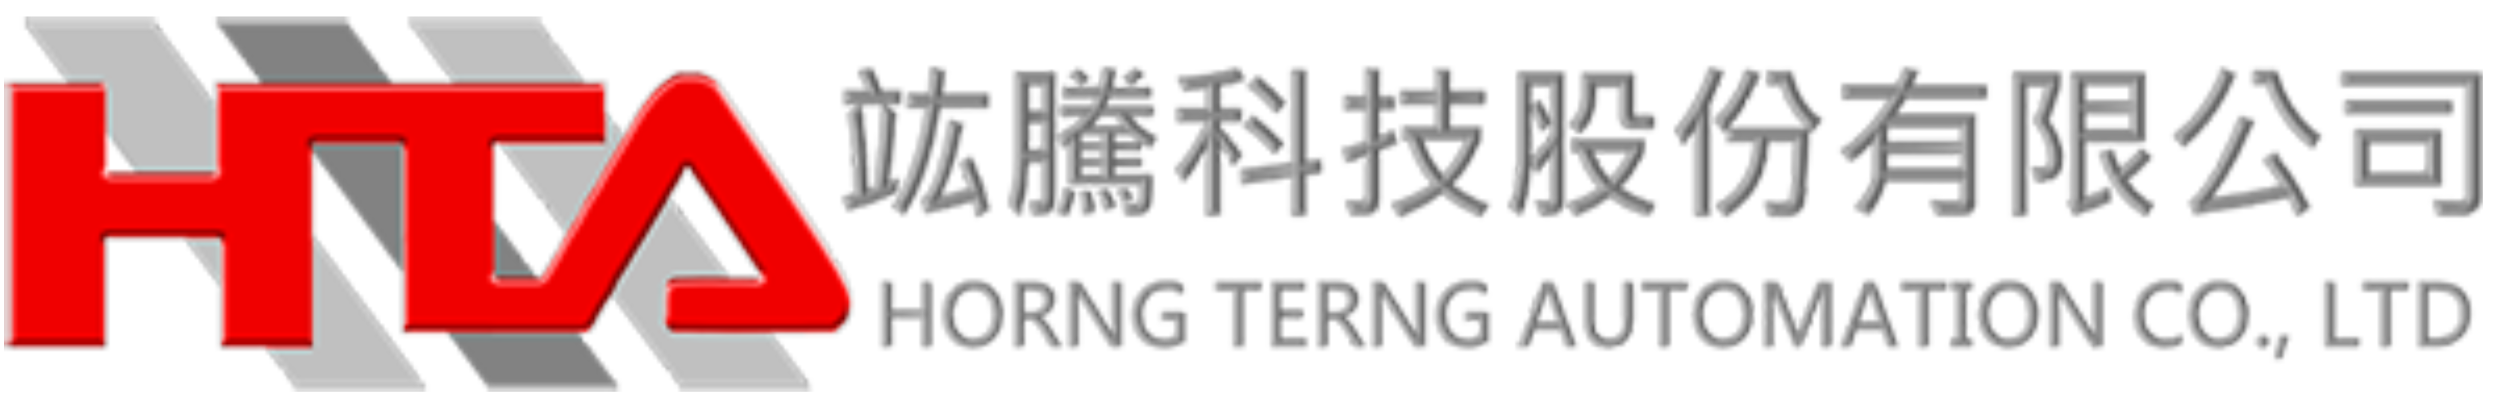 HORNG TERNG AUTOMATION CO., LTD.